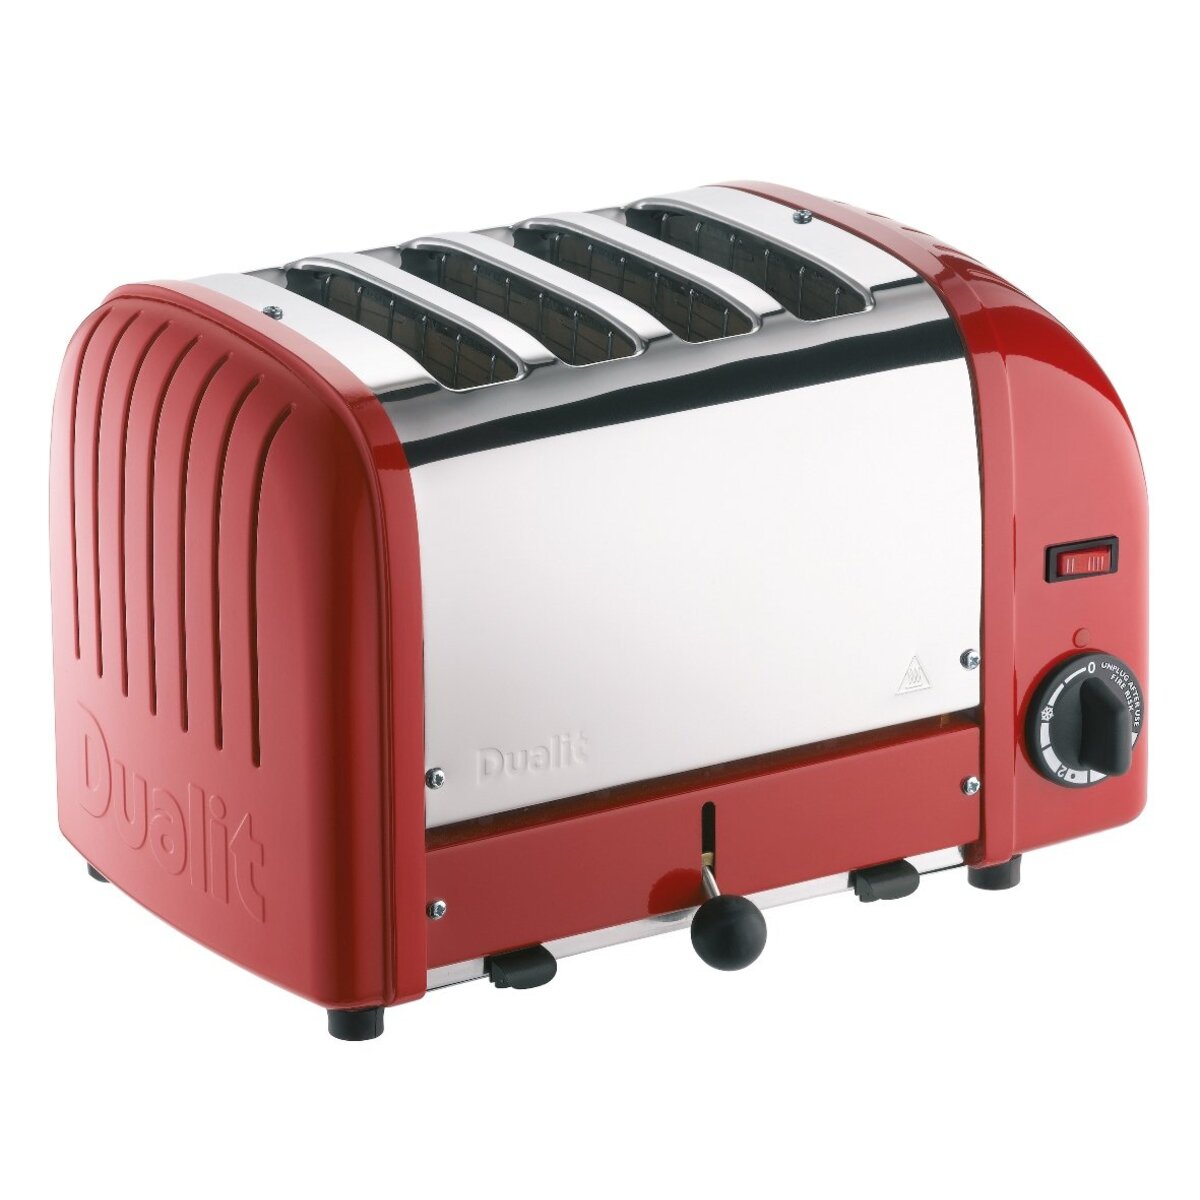 Dualit 40353 Classic Vario 4 Slot Toaster, Red